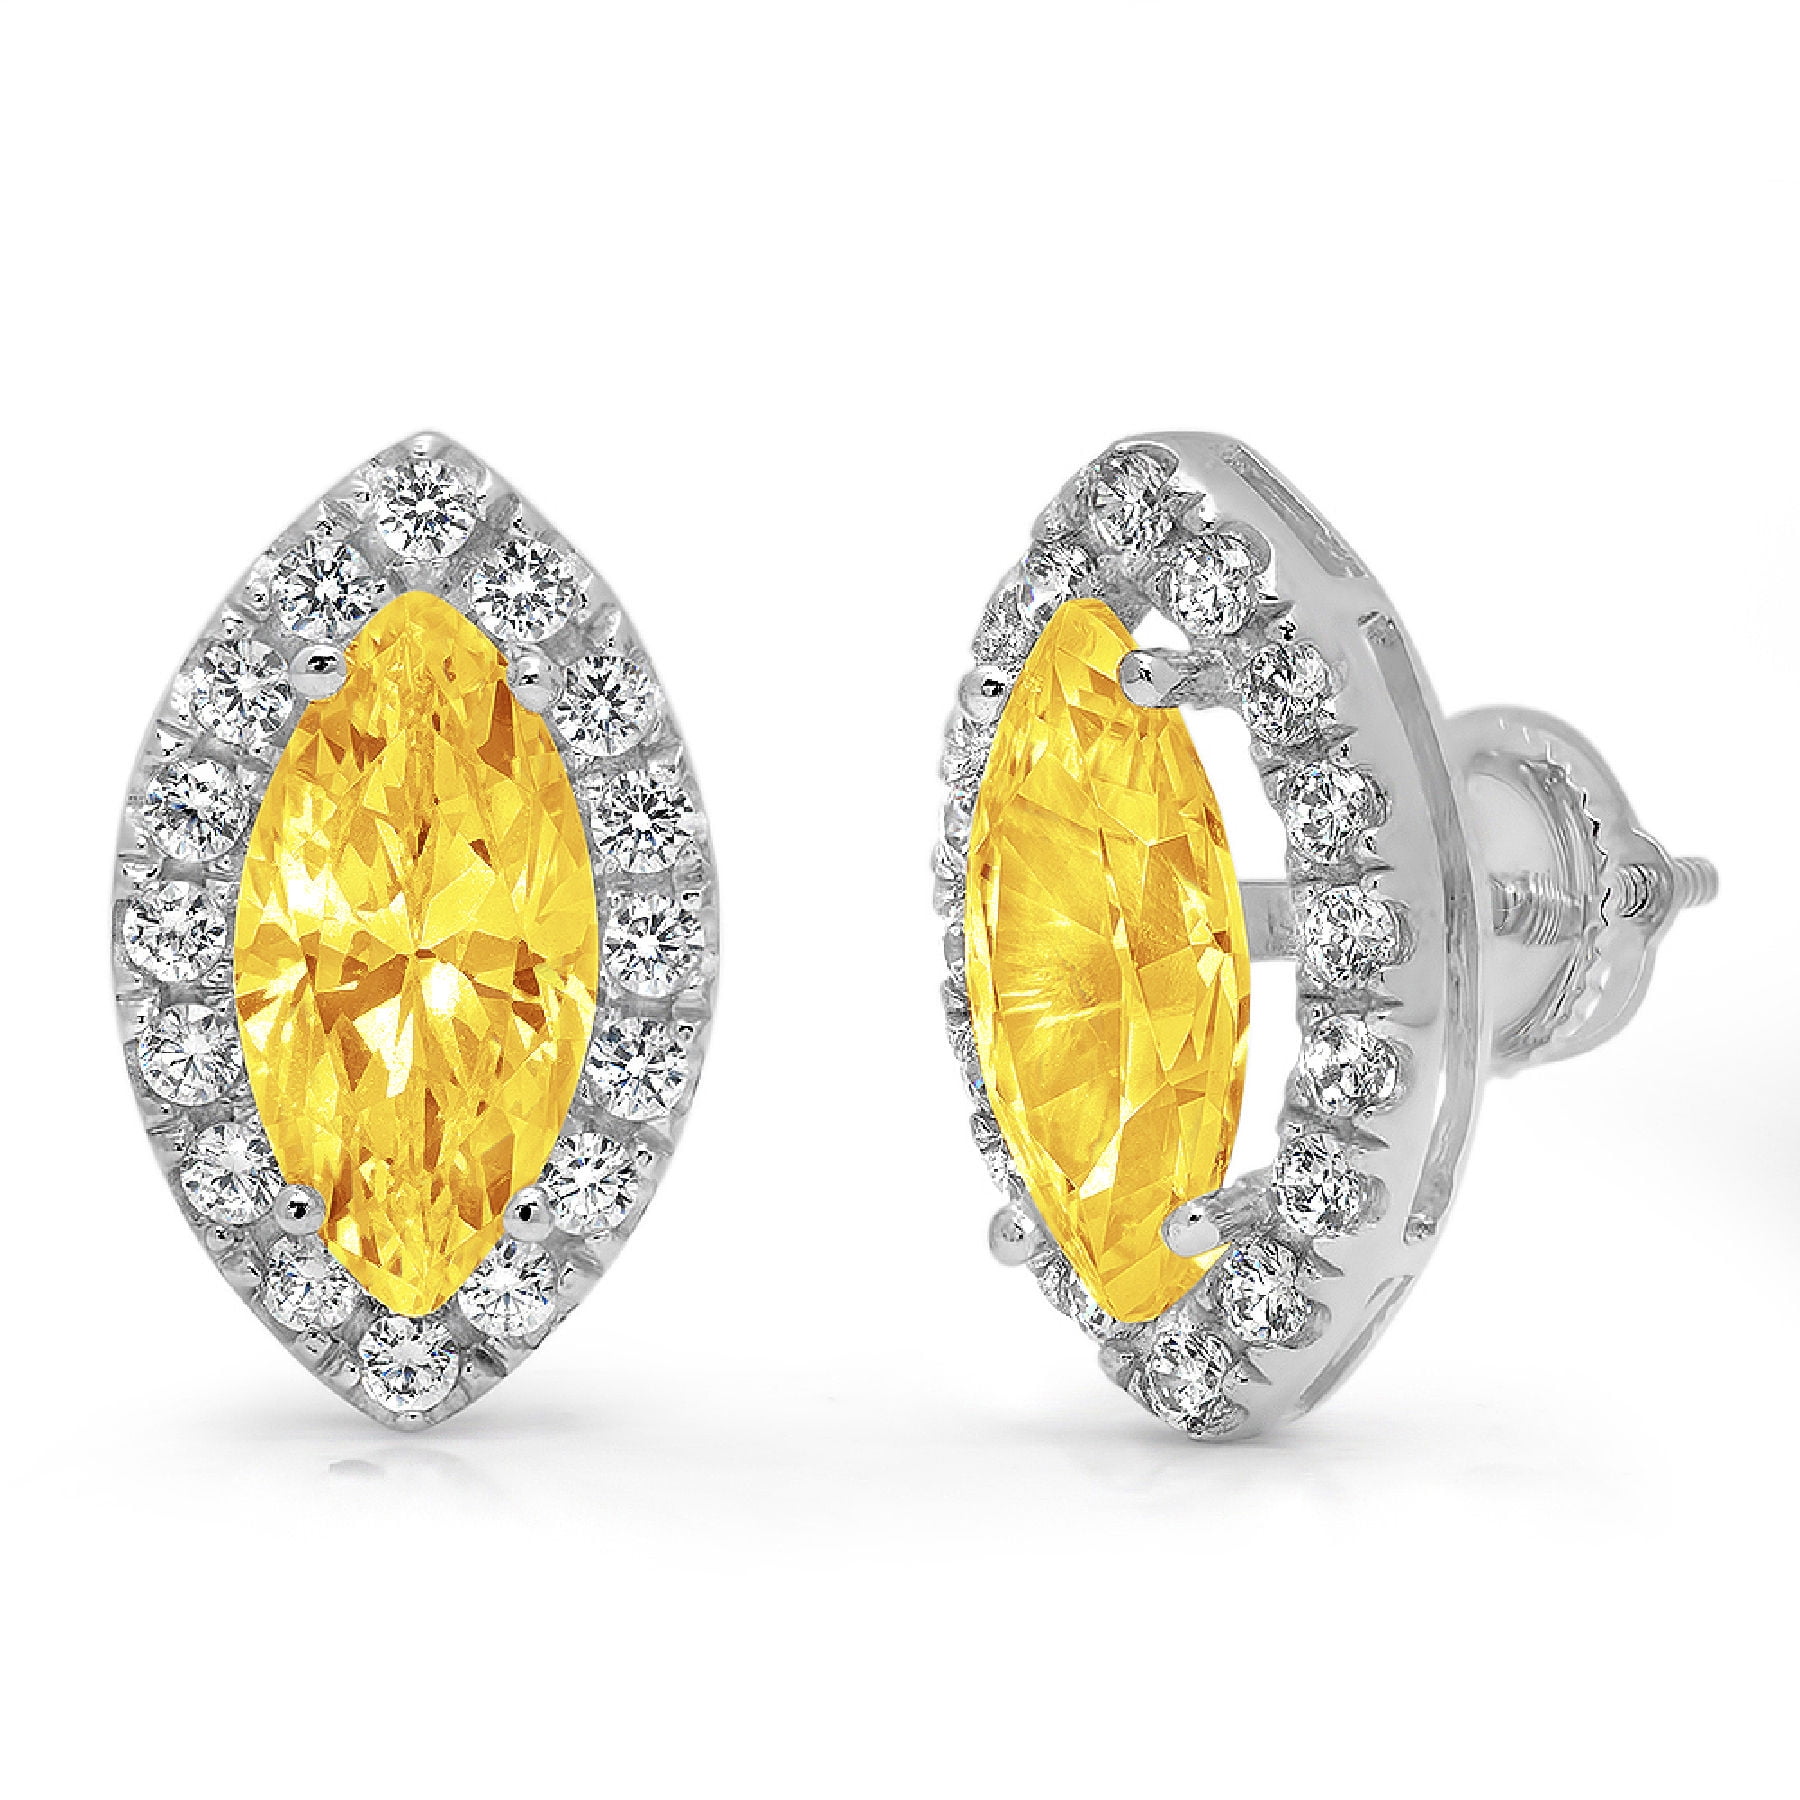 Details about   IJ yellowish color Marquise shape star cut cubic zirconia loose gemstone 